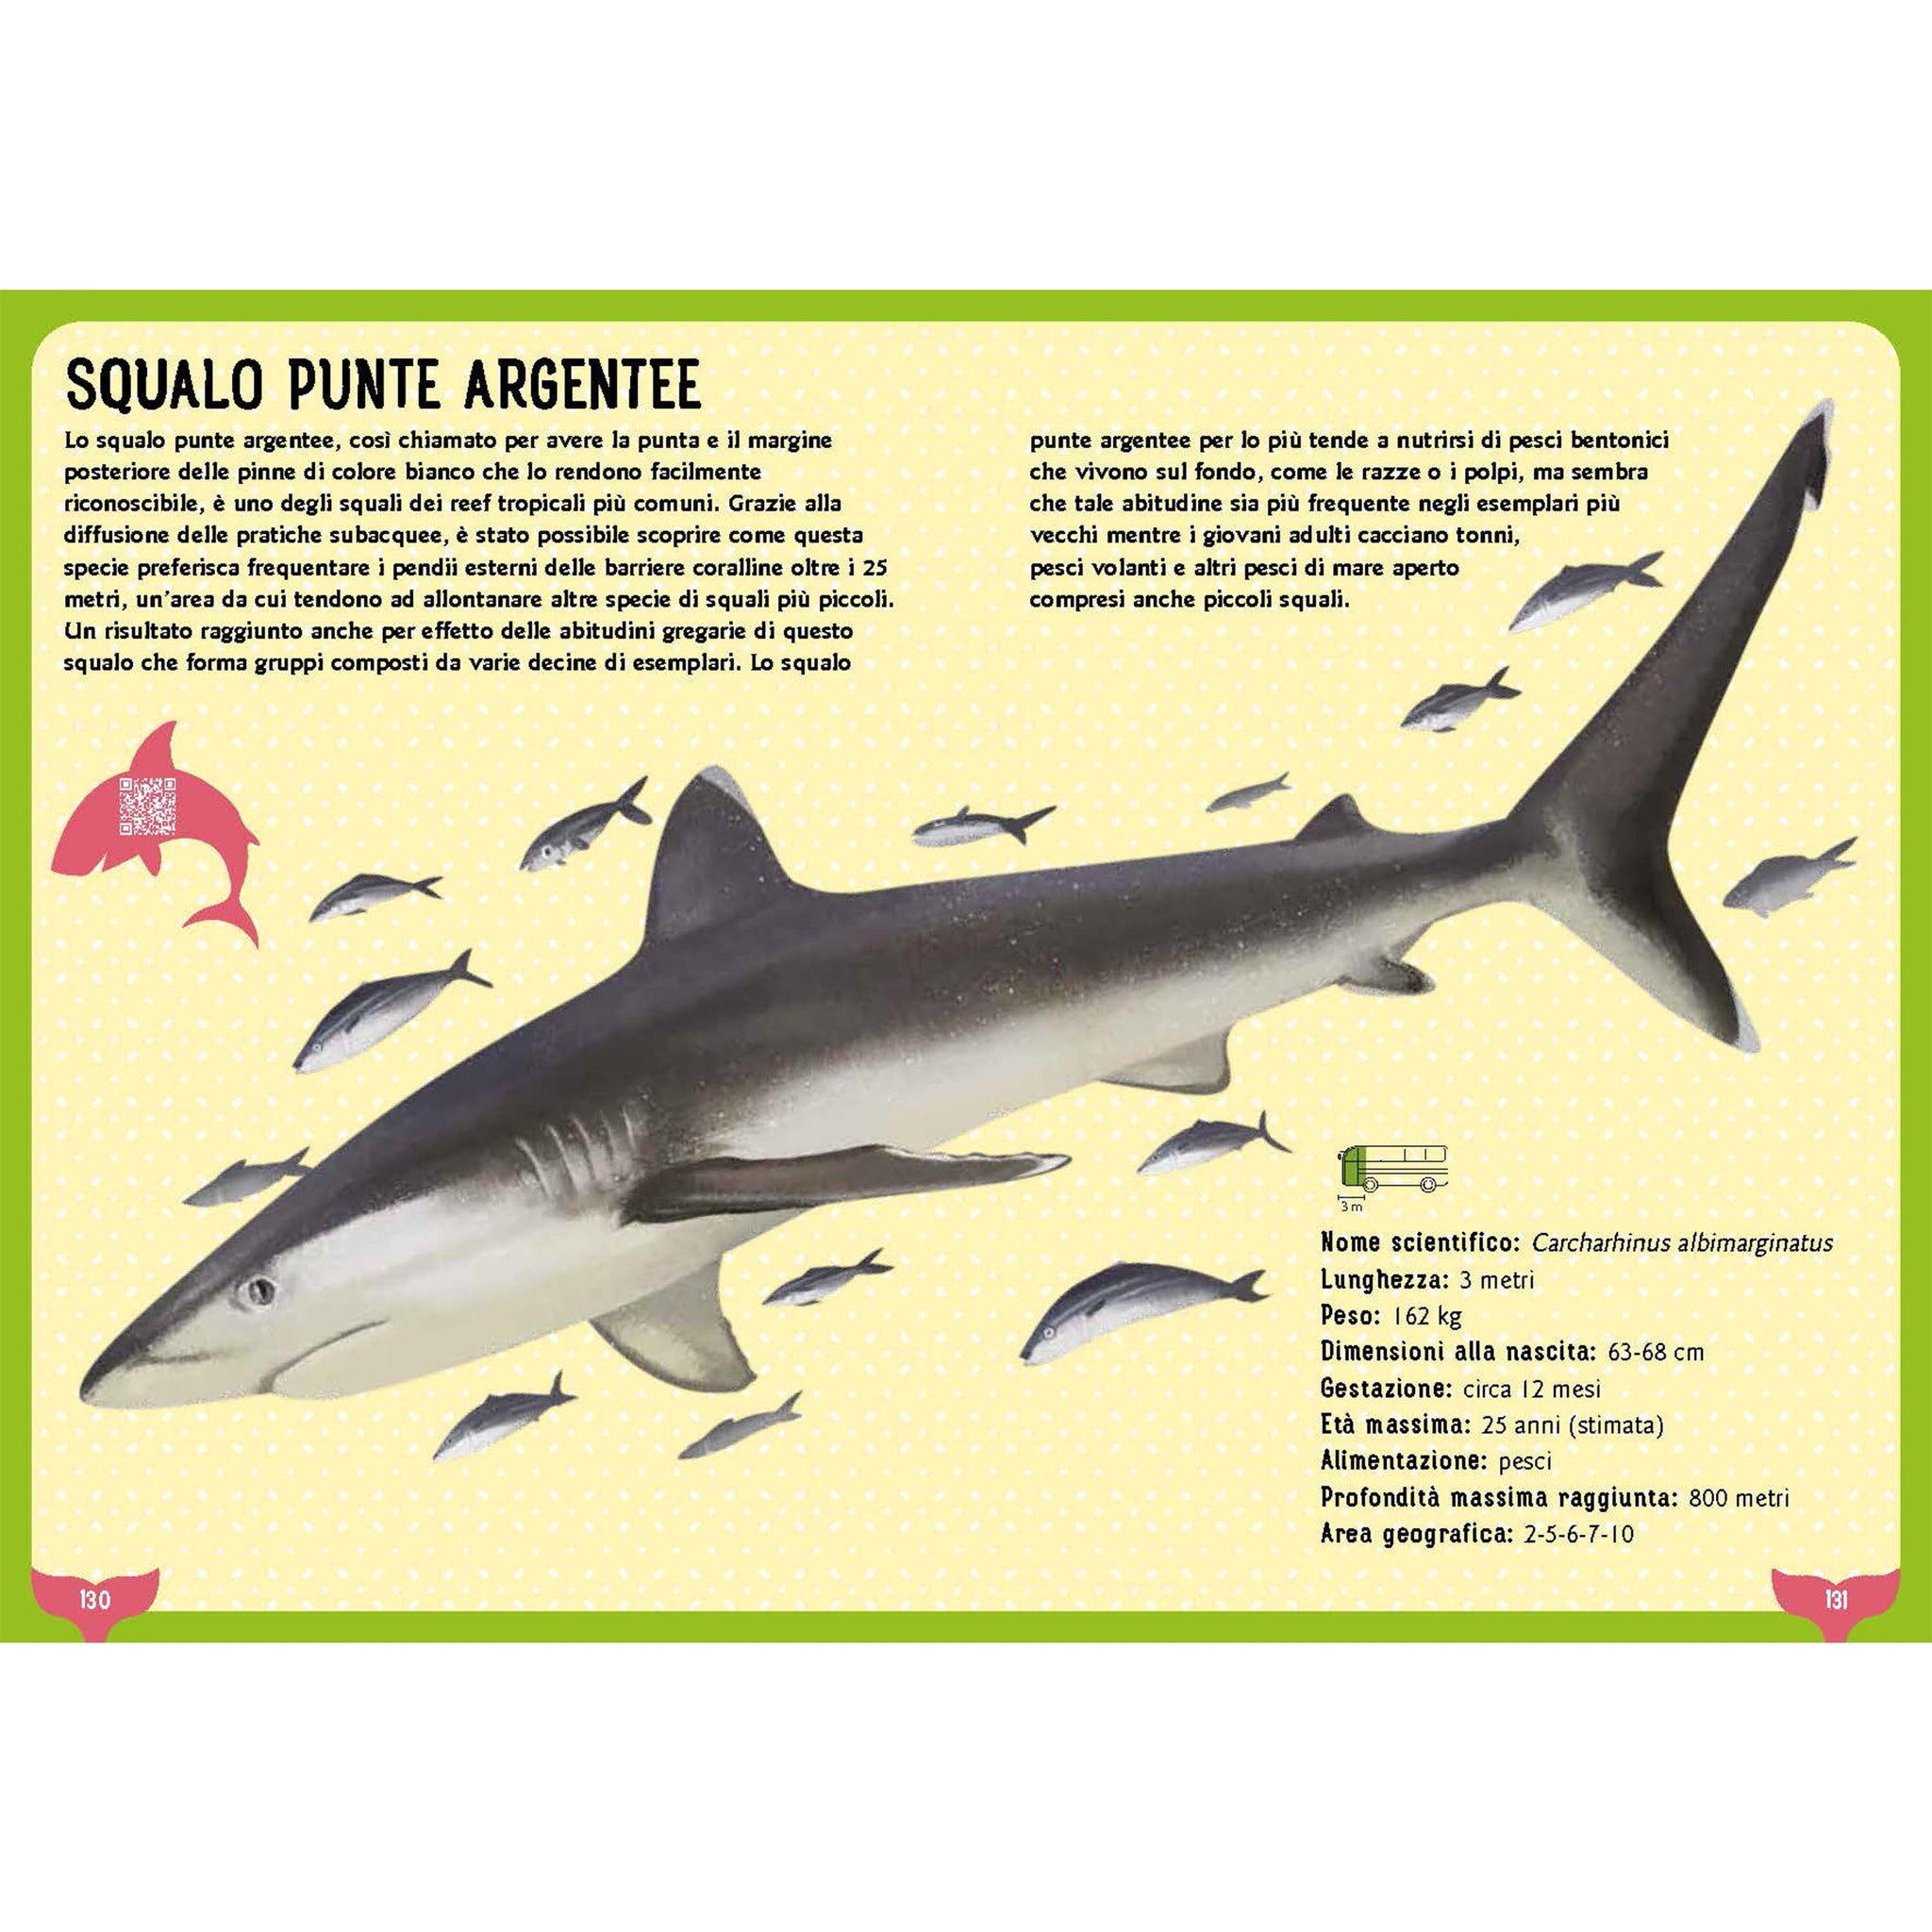 SHARKS, WHALES AND OTHER GIANTS OF THE SEA - An illustrated guide for children aged 0 to 109